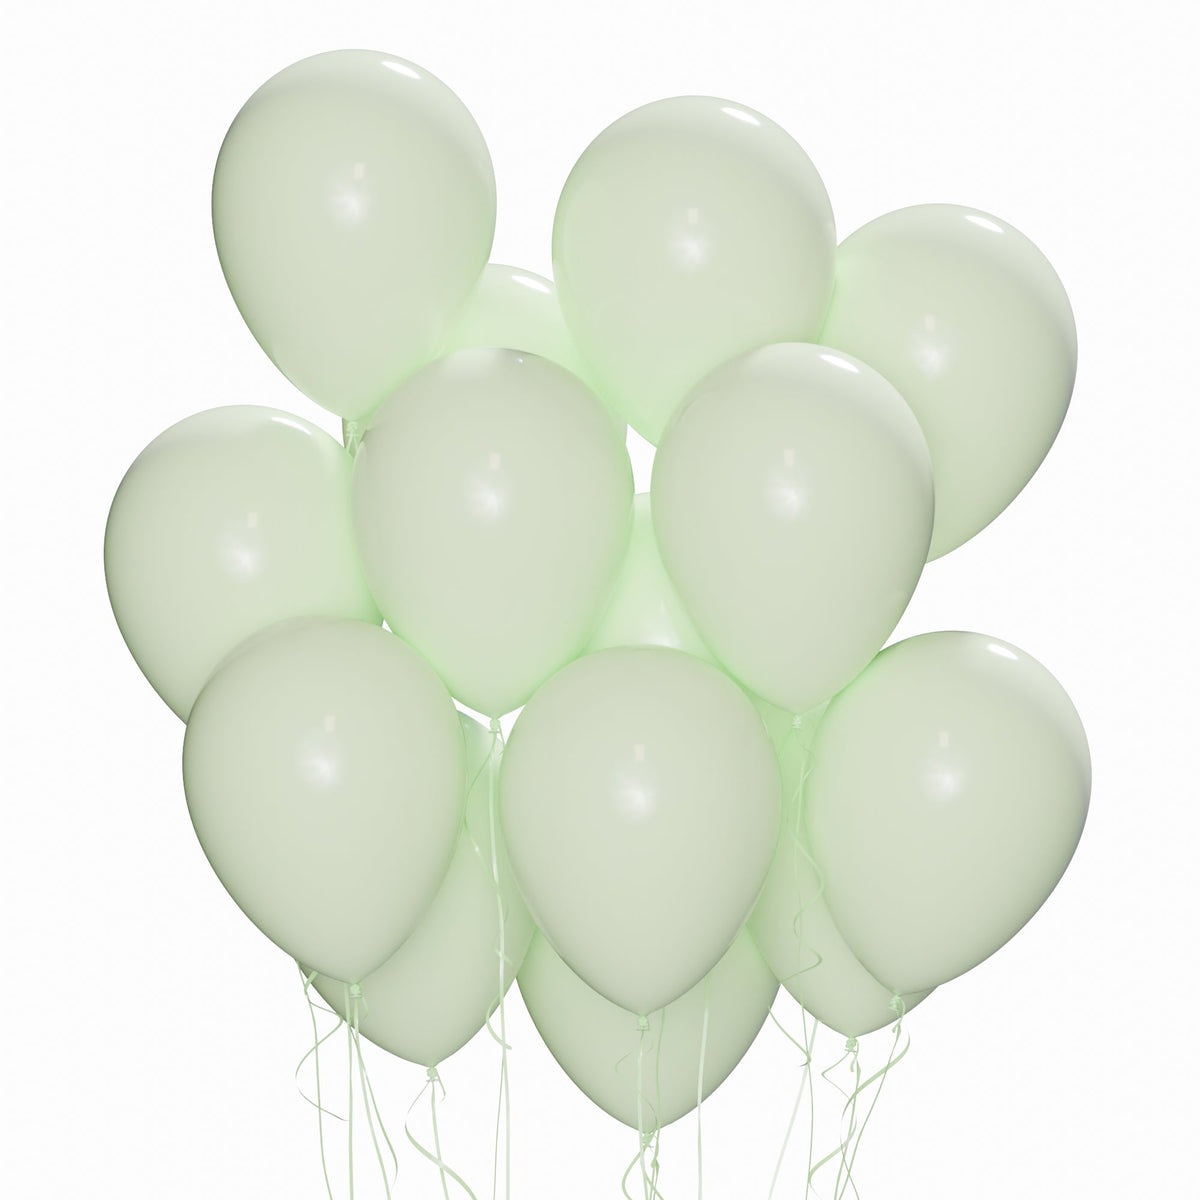 WIDE OCEAN INTERNATIONAL TRADE BEIJING CO., LTD Balloons Green Latex Balloon 12 Inches, Macaroon Collection, 72 Count 810064198939